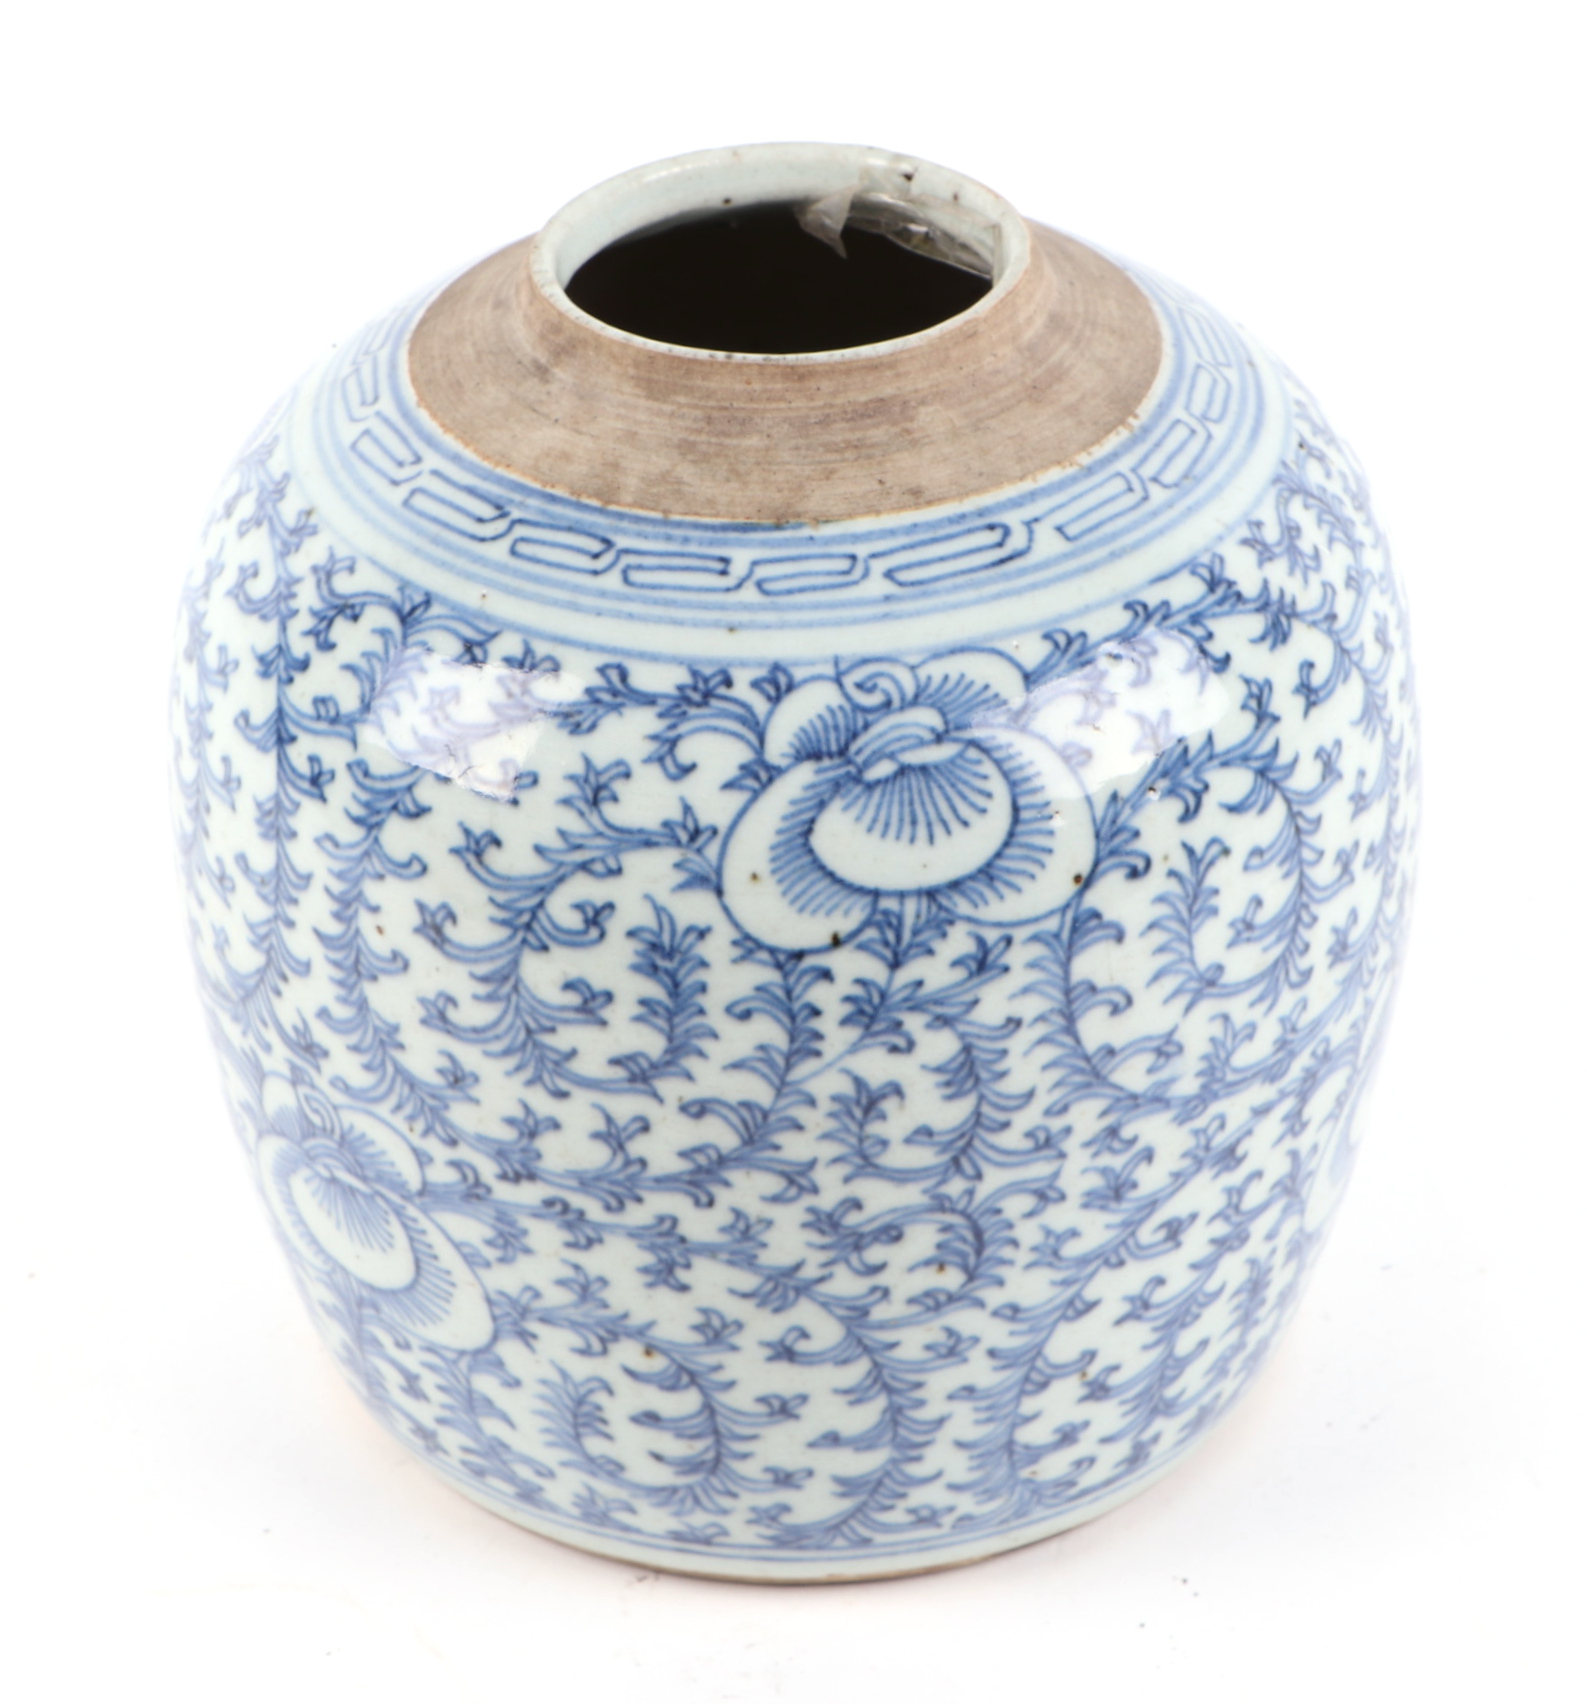 A late 18th / early 19th century Qing blue and white rice jar, with repeating floral decoration, - Image 2 of 3